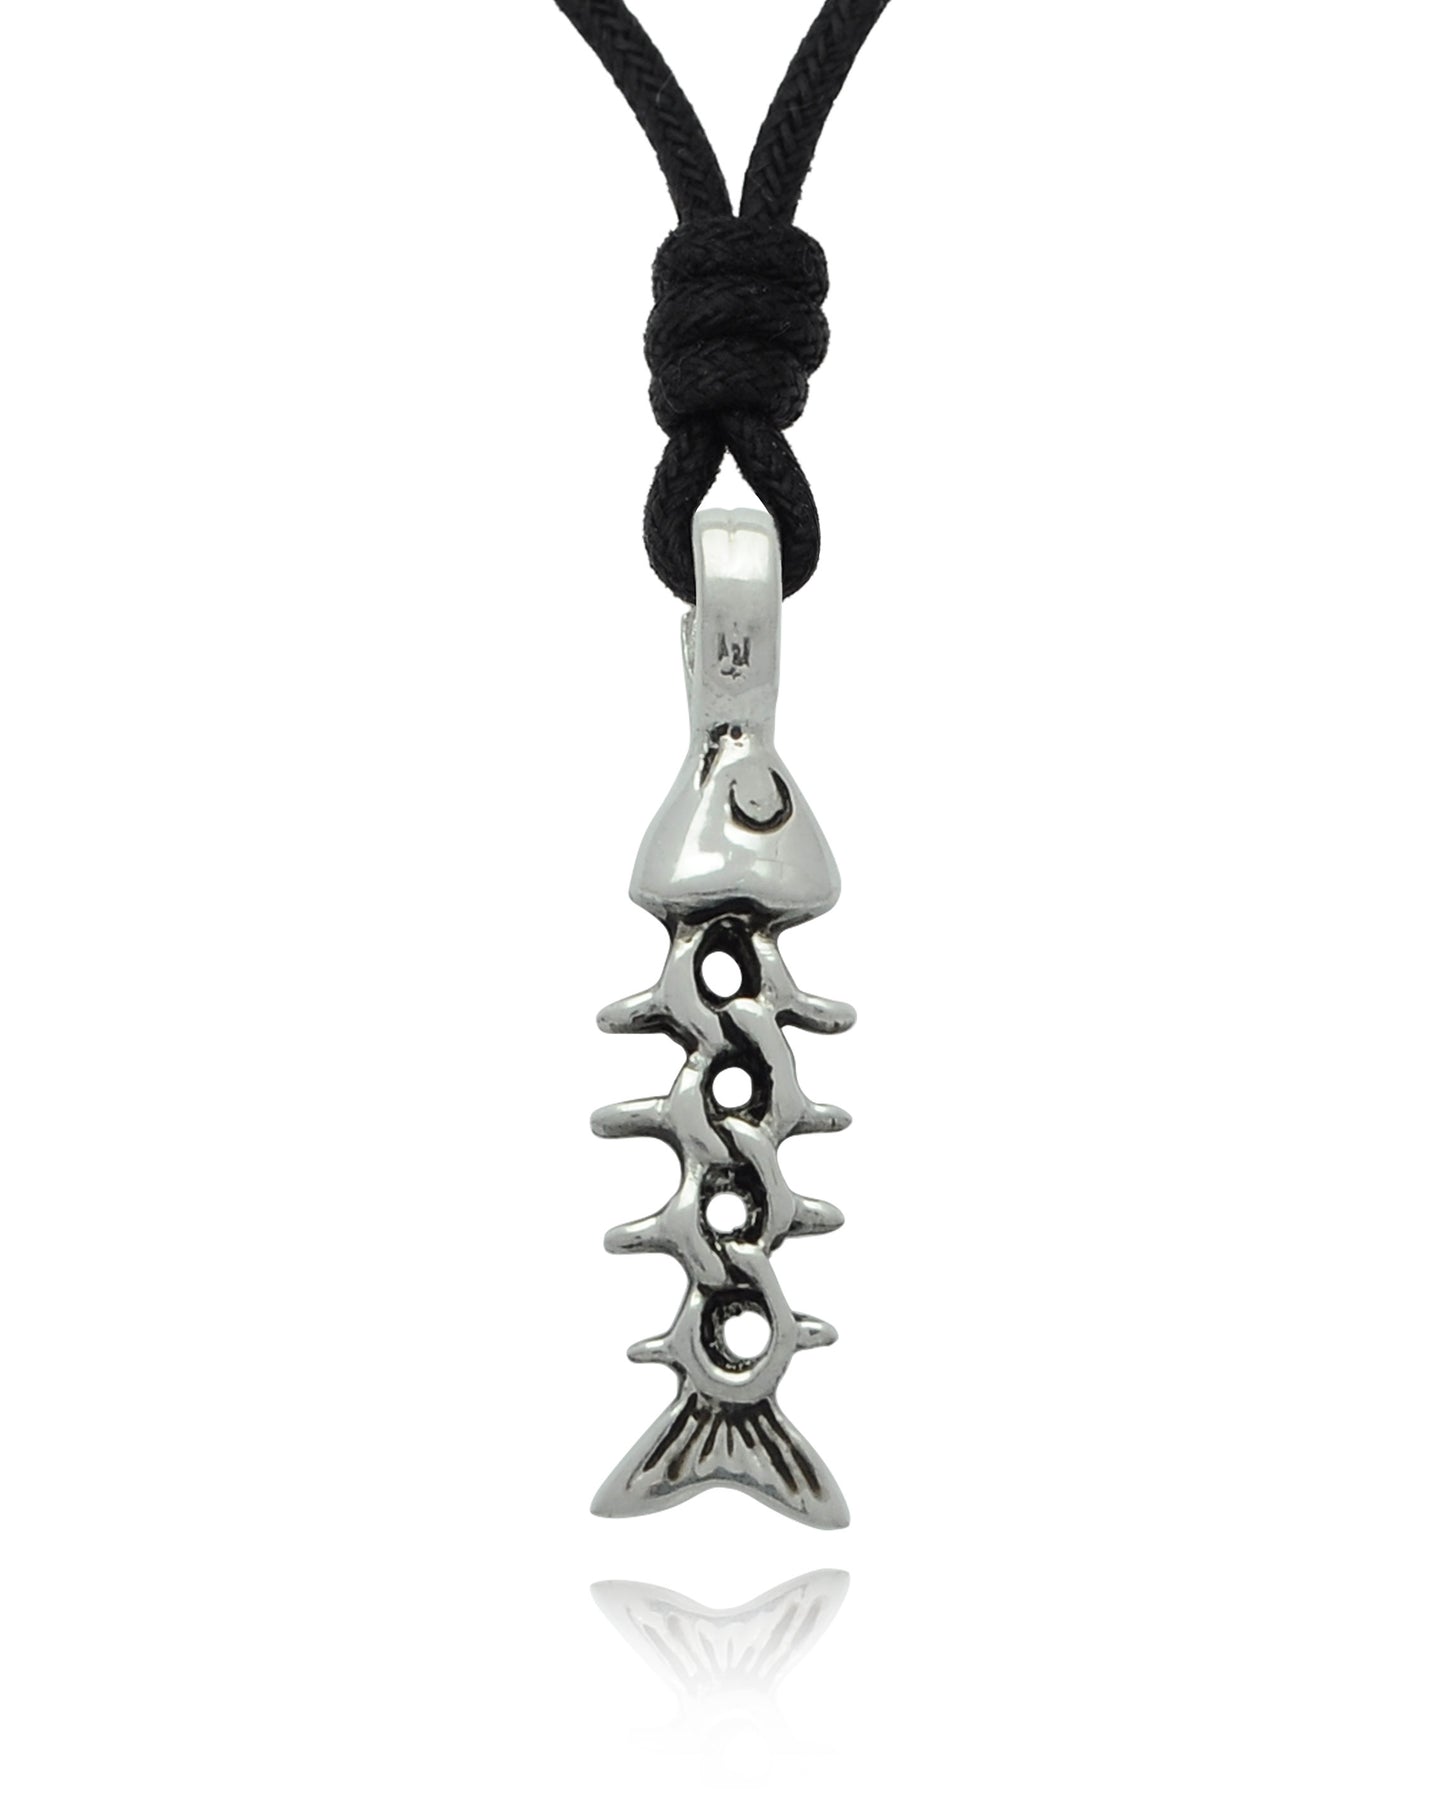 Chain Shaped Fish Skeleton Silver Pewter Charm Necklace Pendant Jewelry